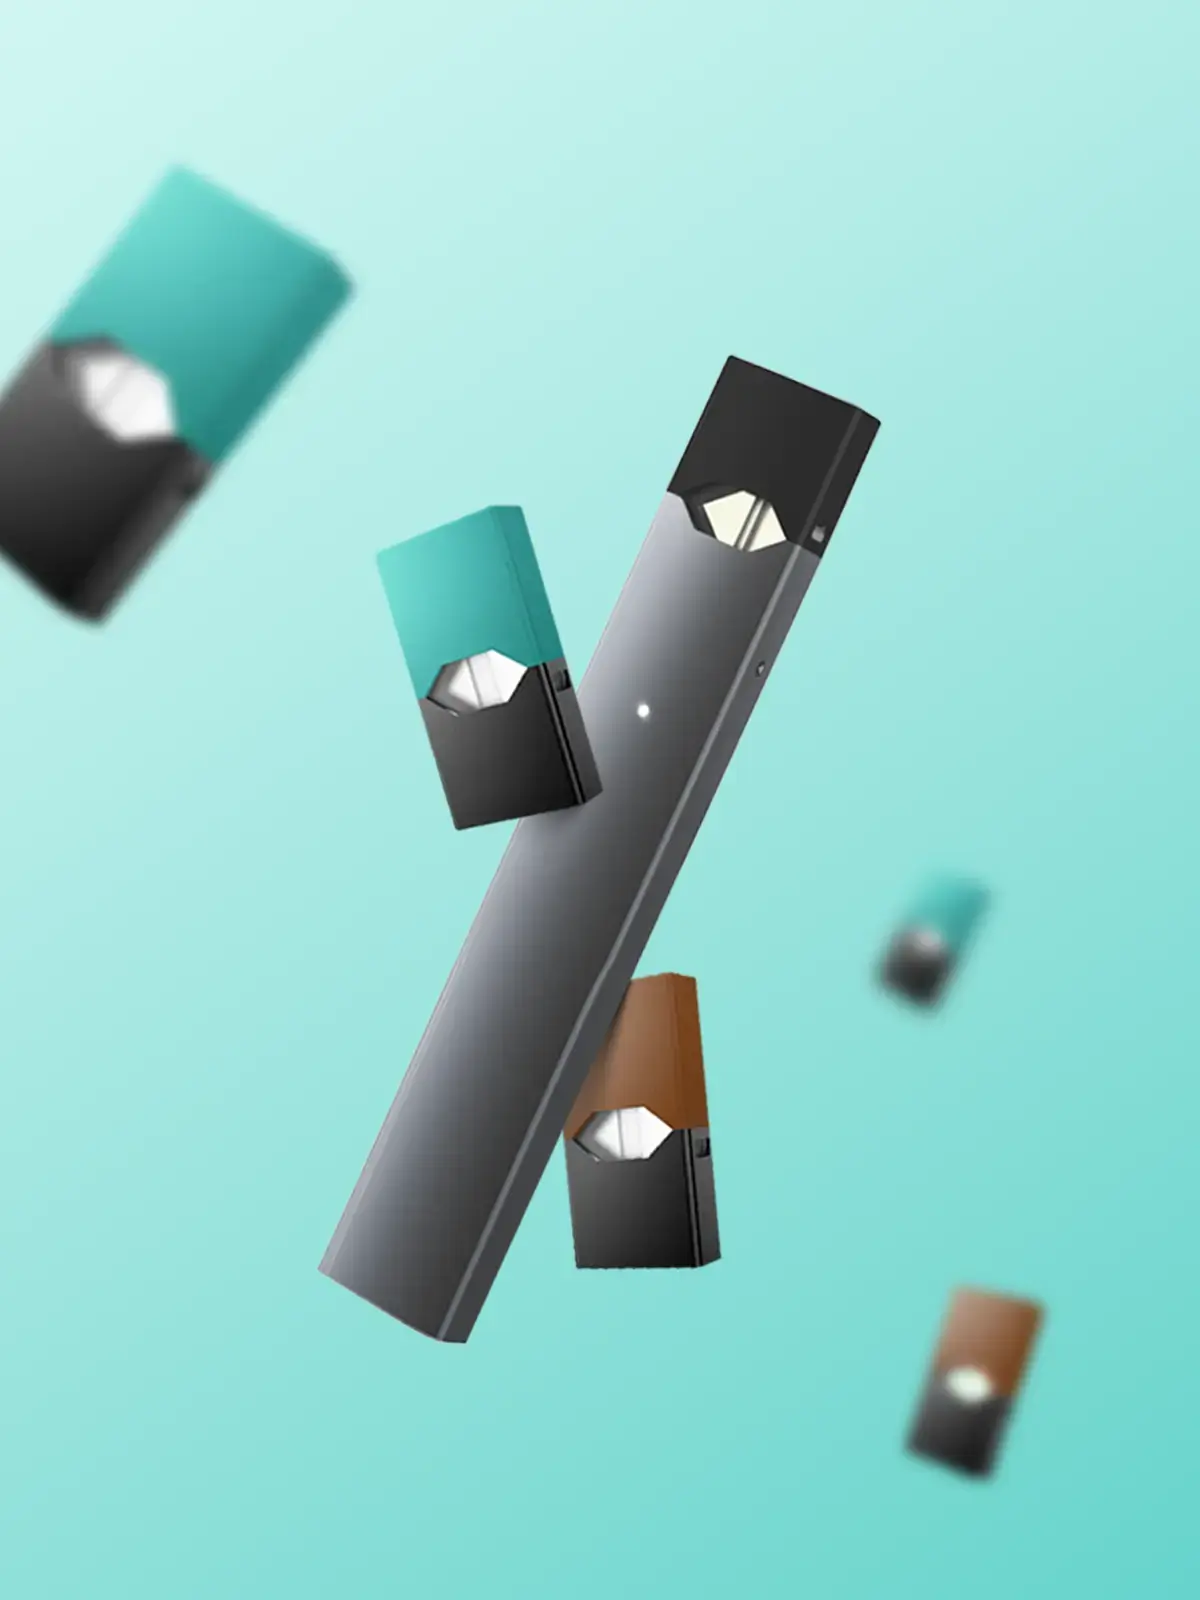 JUUL Tobacco and JUUL Menthol pods along with a JUUL device, floating in front of a light blue background